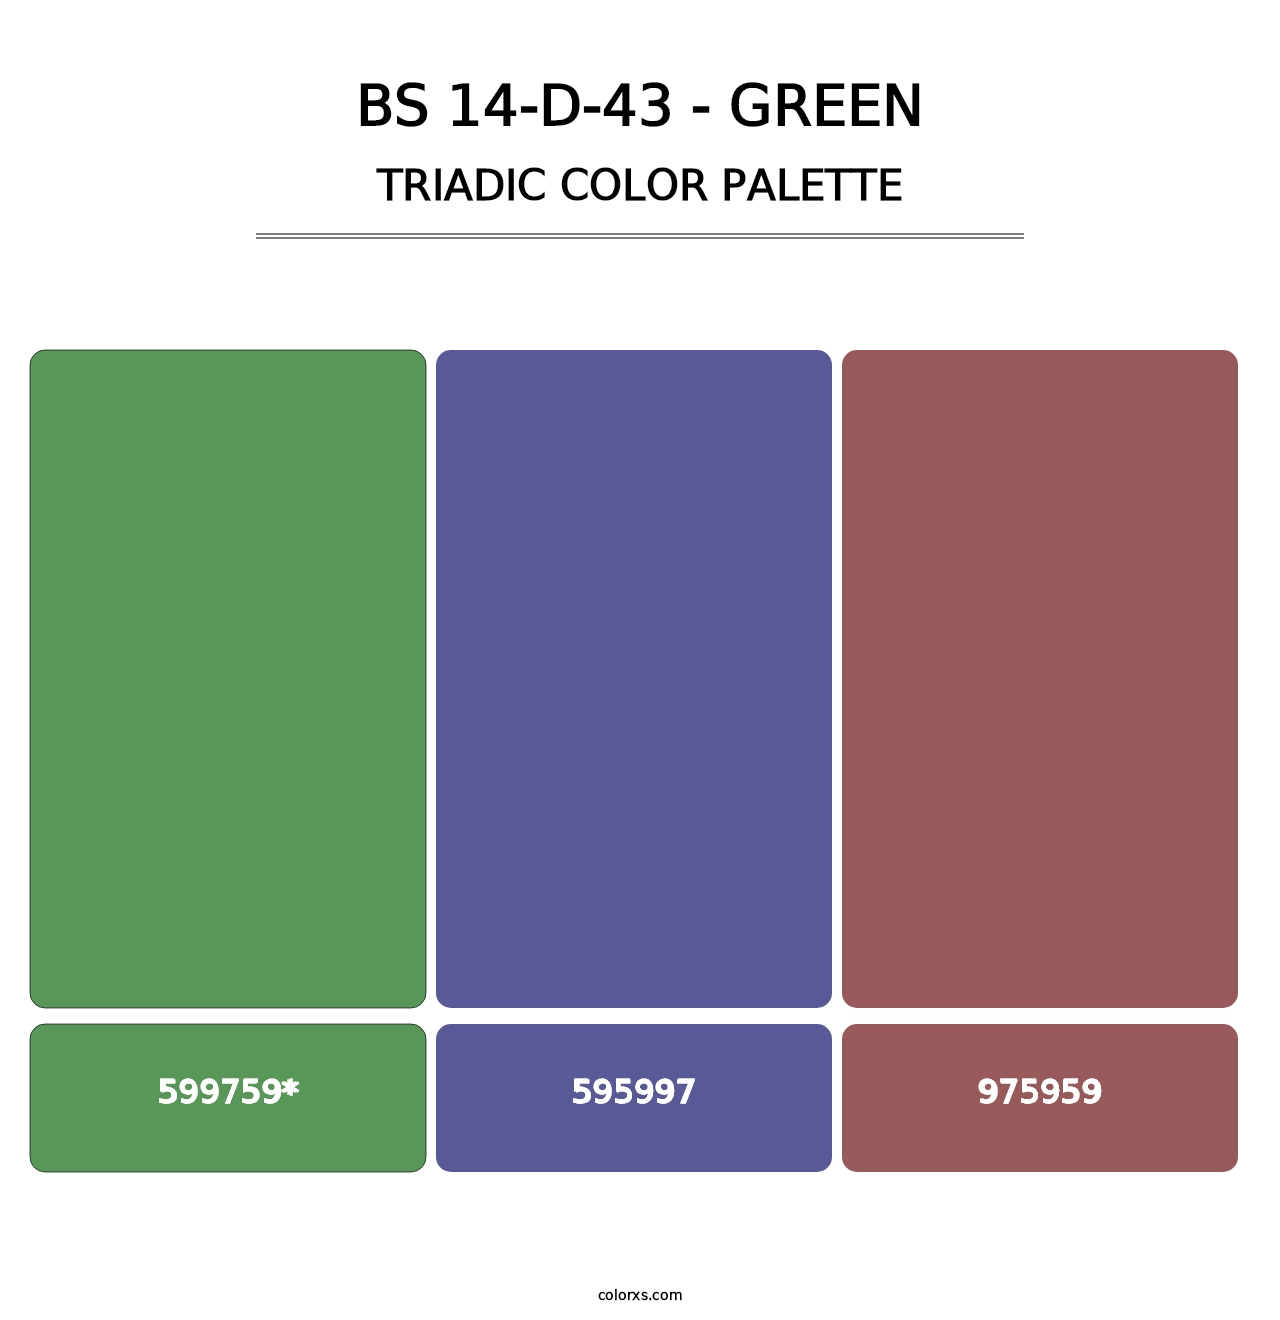 BS 14-D-43 - Green - Triadic Color Palette